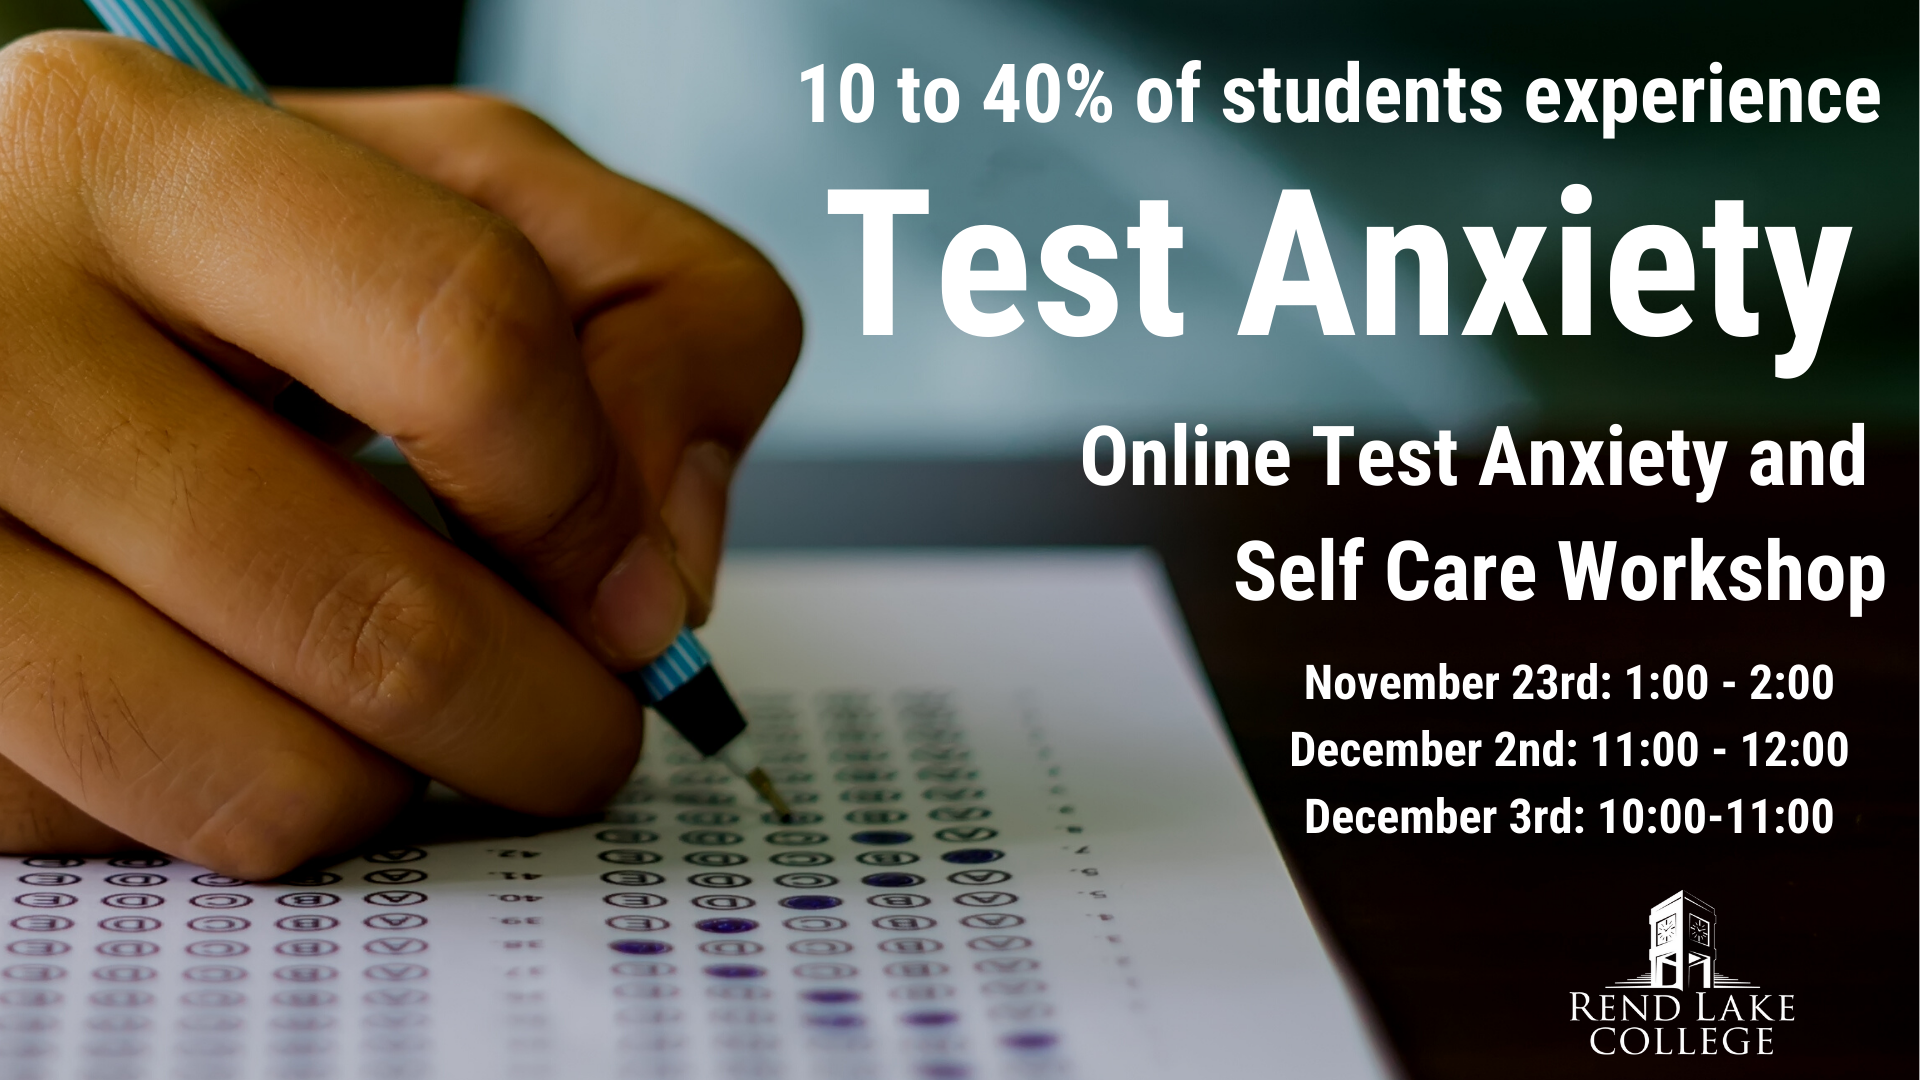 Register For Our Online Test Anxiety Workshop